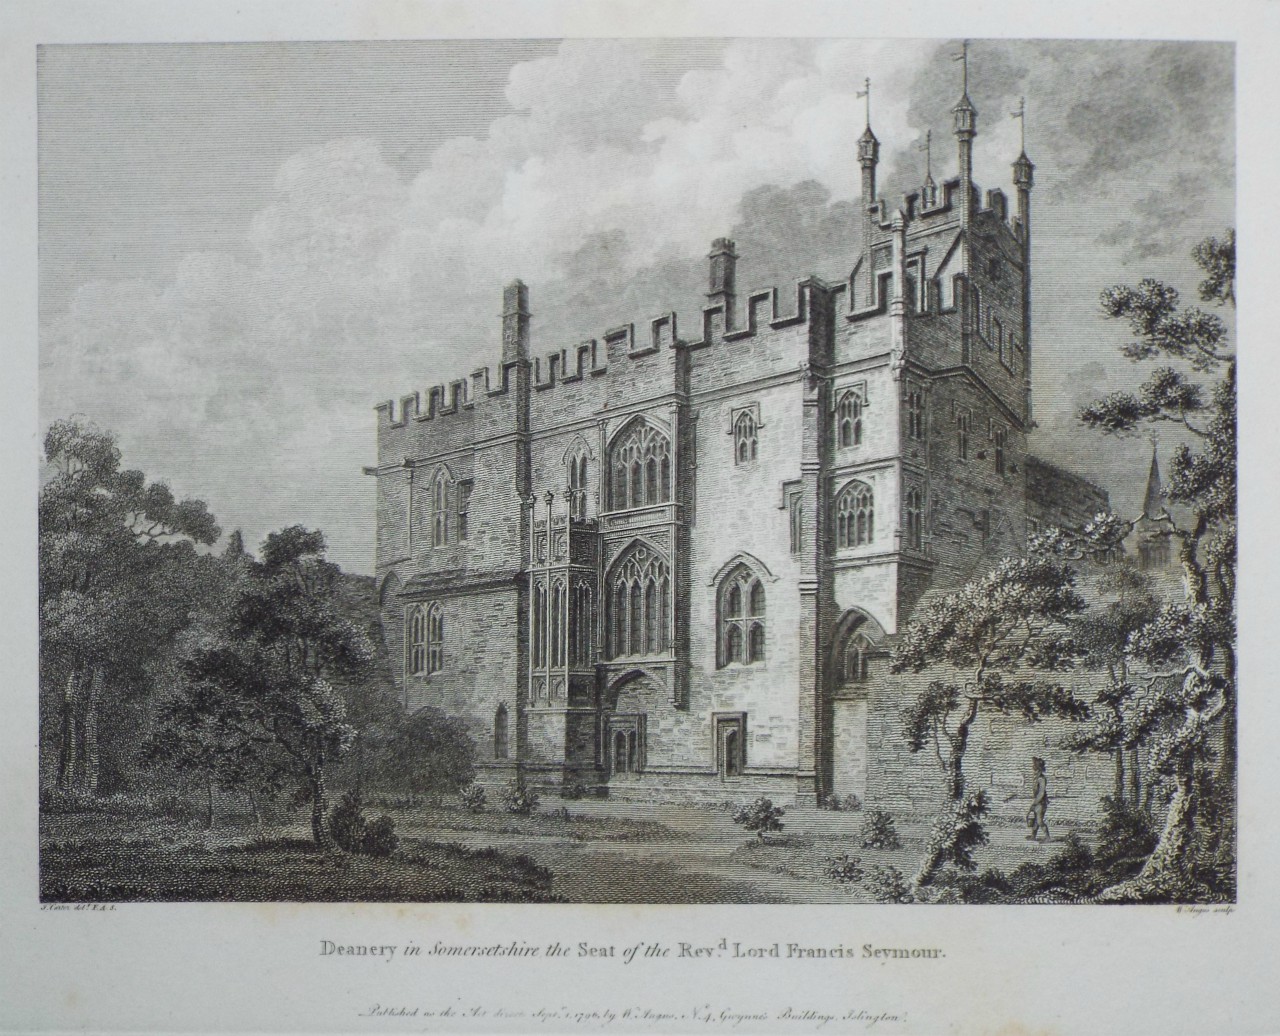 Print - Deanery in Somersetshire the Seat of the Revd. Lord Francis Seymour. - Angus